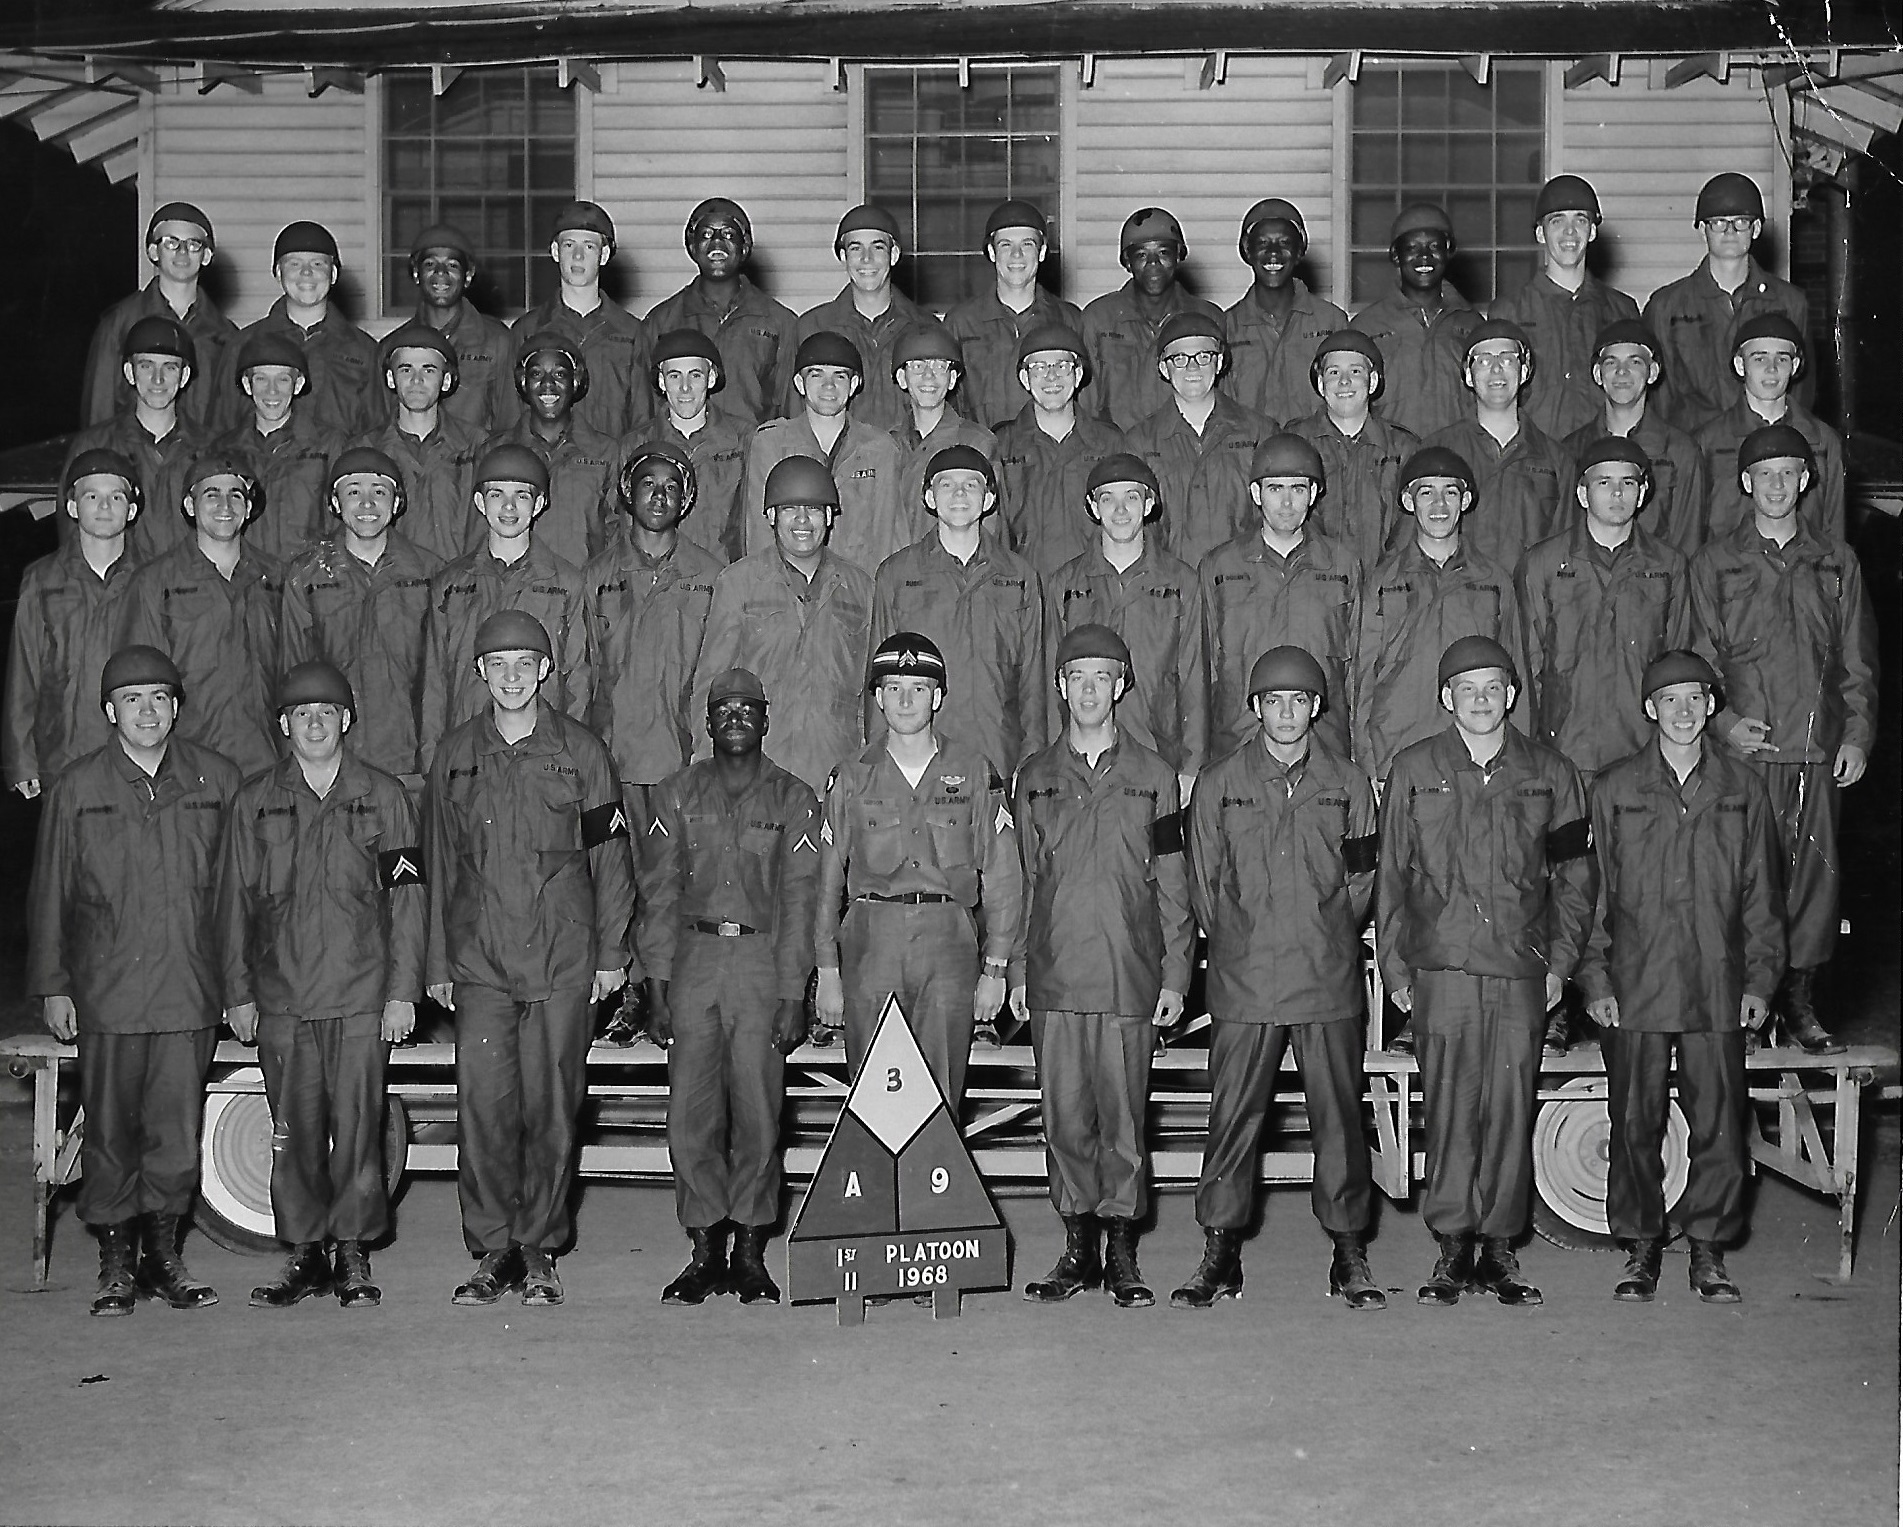 fort-knox-ky-1968-fort-knox-a-3-9-1st-platoon-the-military